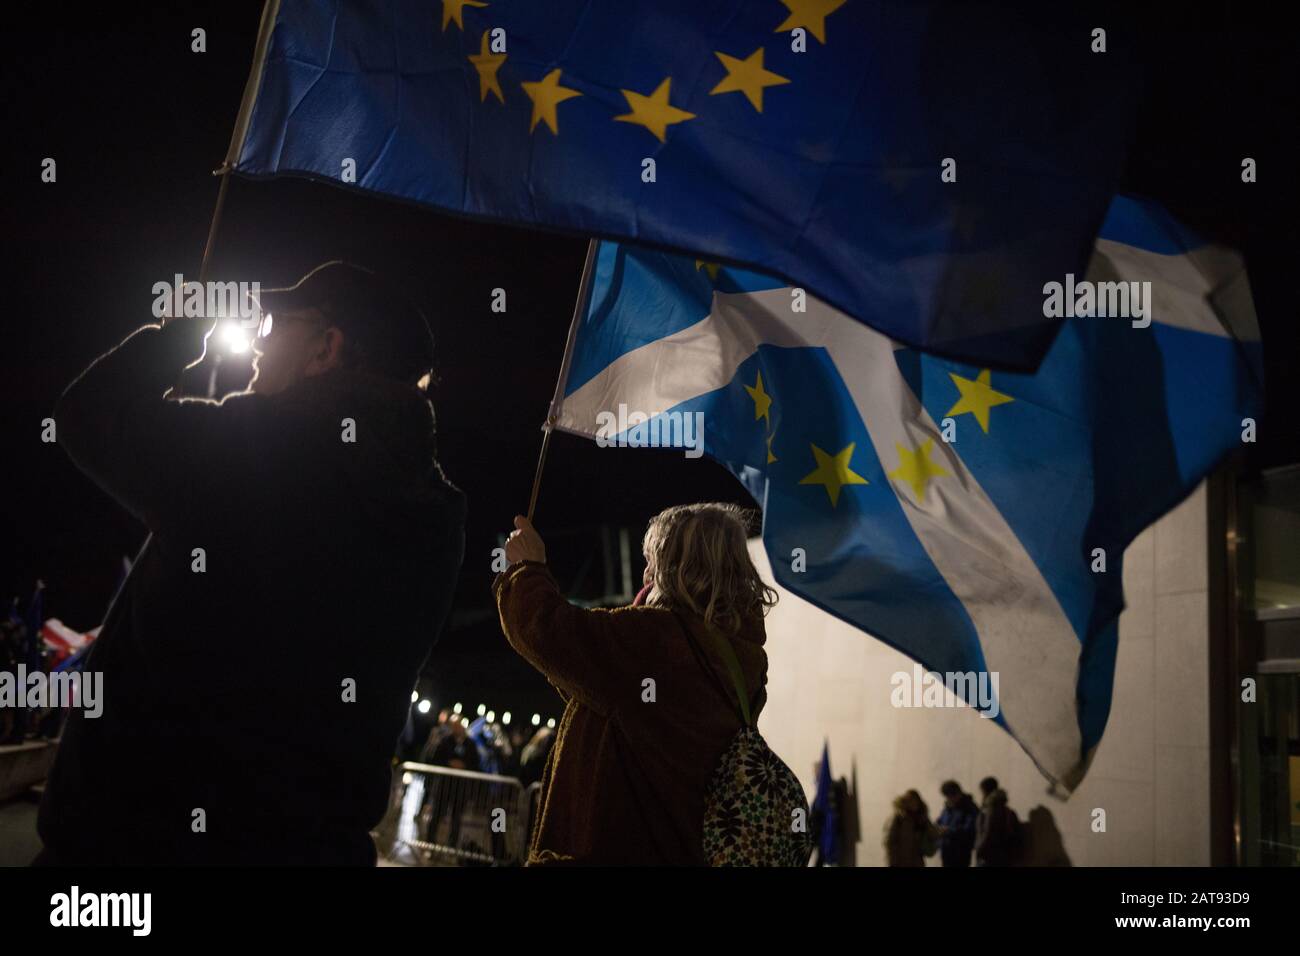 Edinburgh, UK. 31st Jan, 2020. 'Missing EU Already' Brexit Day Protest rally, outside the Scottish Parliament building on the evening that the United Kingdom leaves the European Union. Credit: jeremy sutton-hibbert/Alamy Live News Stock Photo